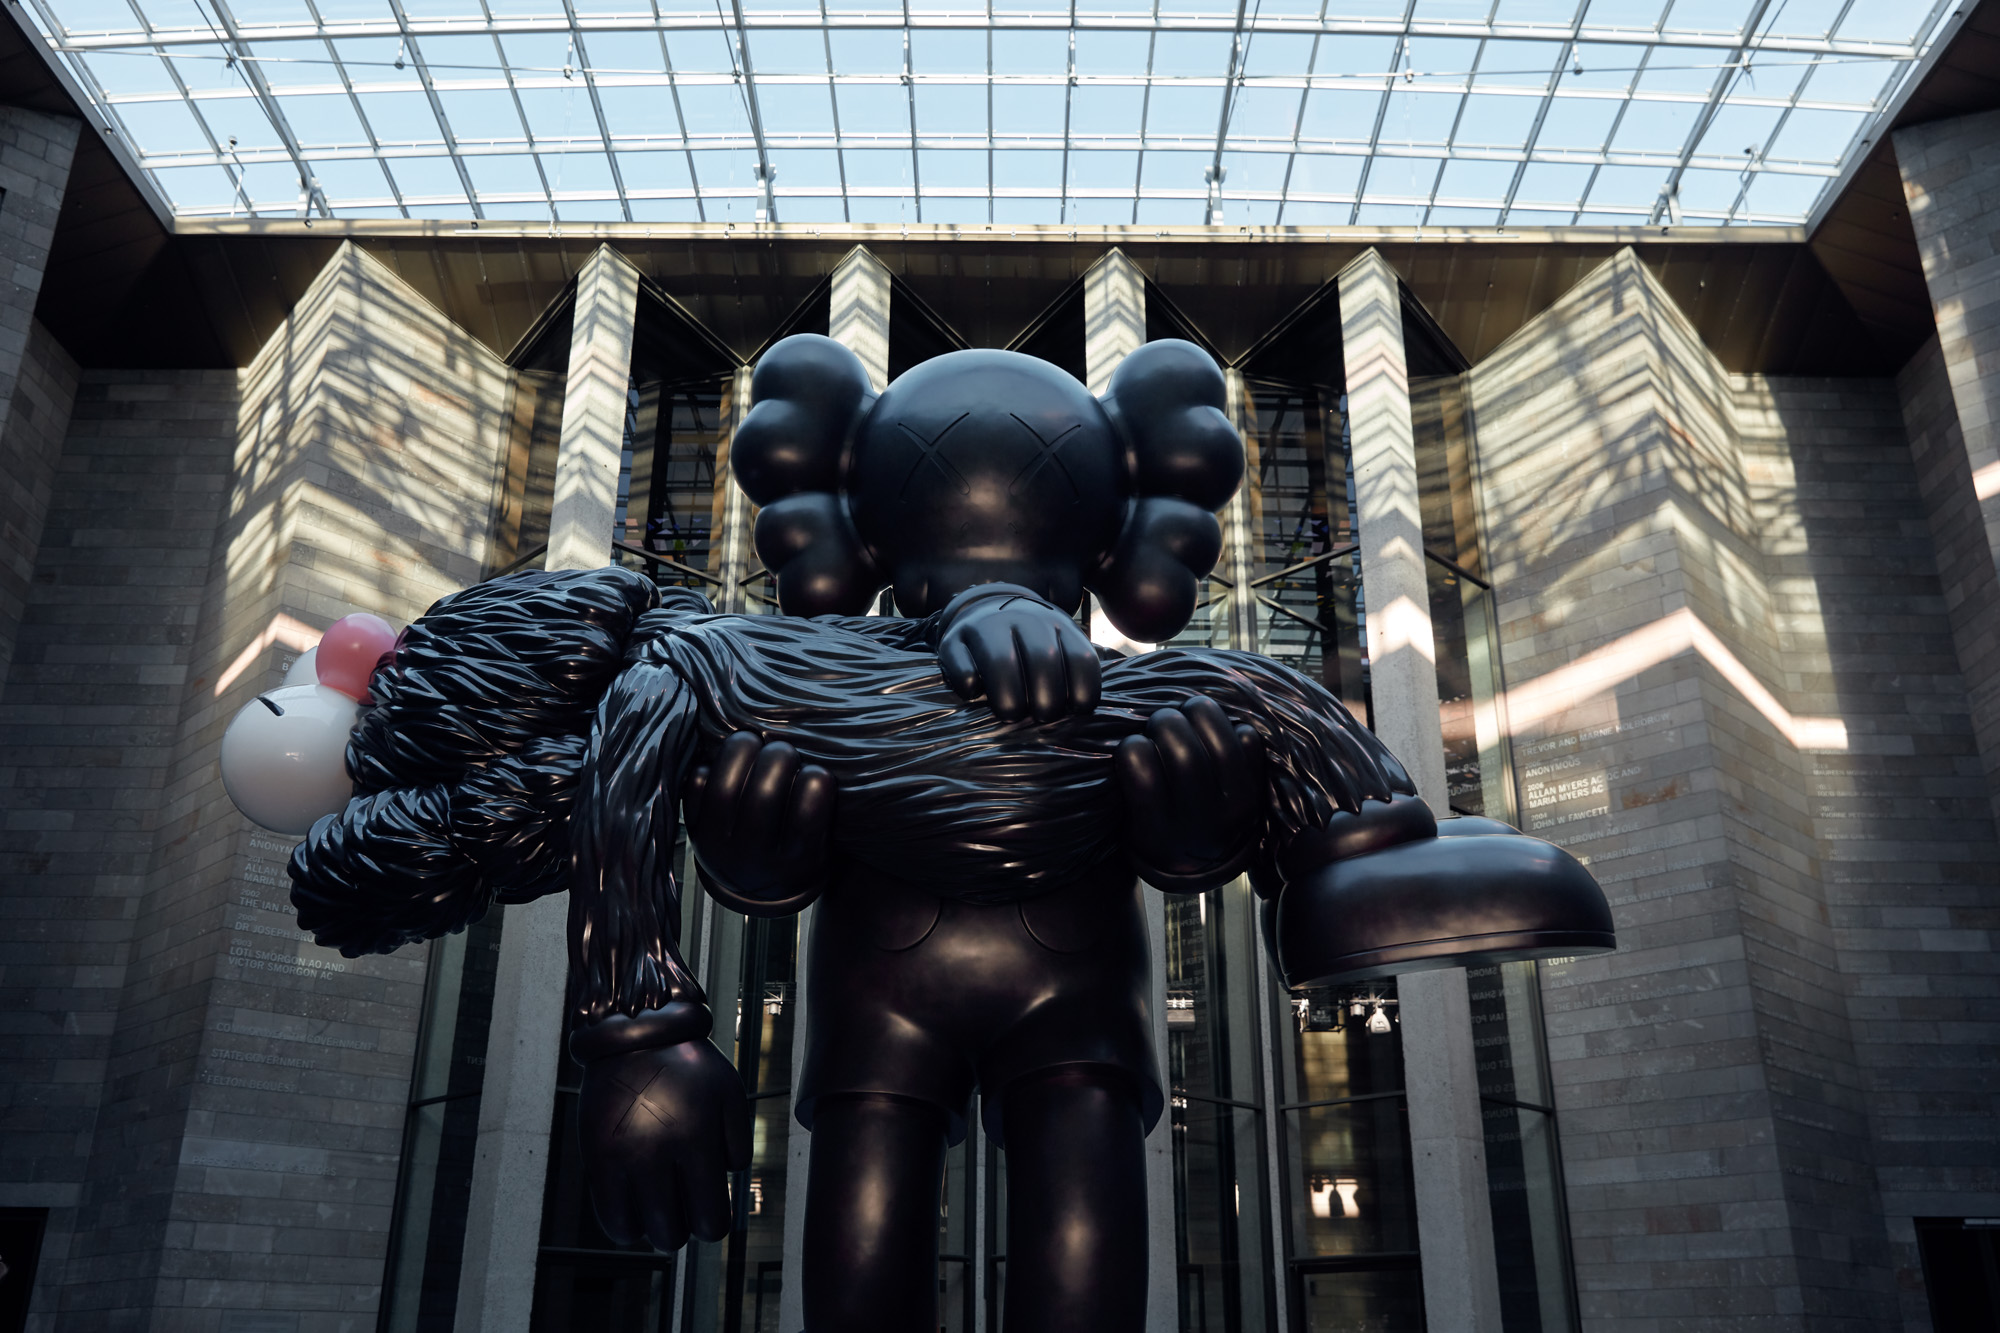 Installation view of KAWS’s <em>GONE</em>, 2019 on display for KAWS: Companionship in the Age of Loneliness at NGV International, Melbourne 20 September 2019 – 13 April 2020. Photo © Tom Ross